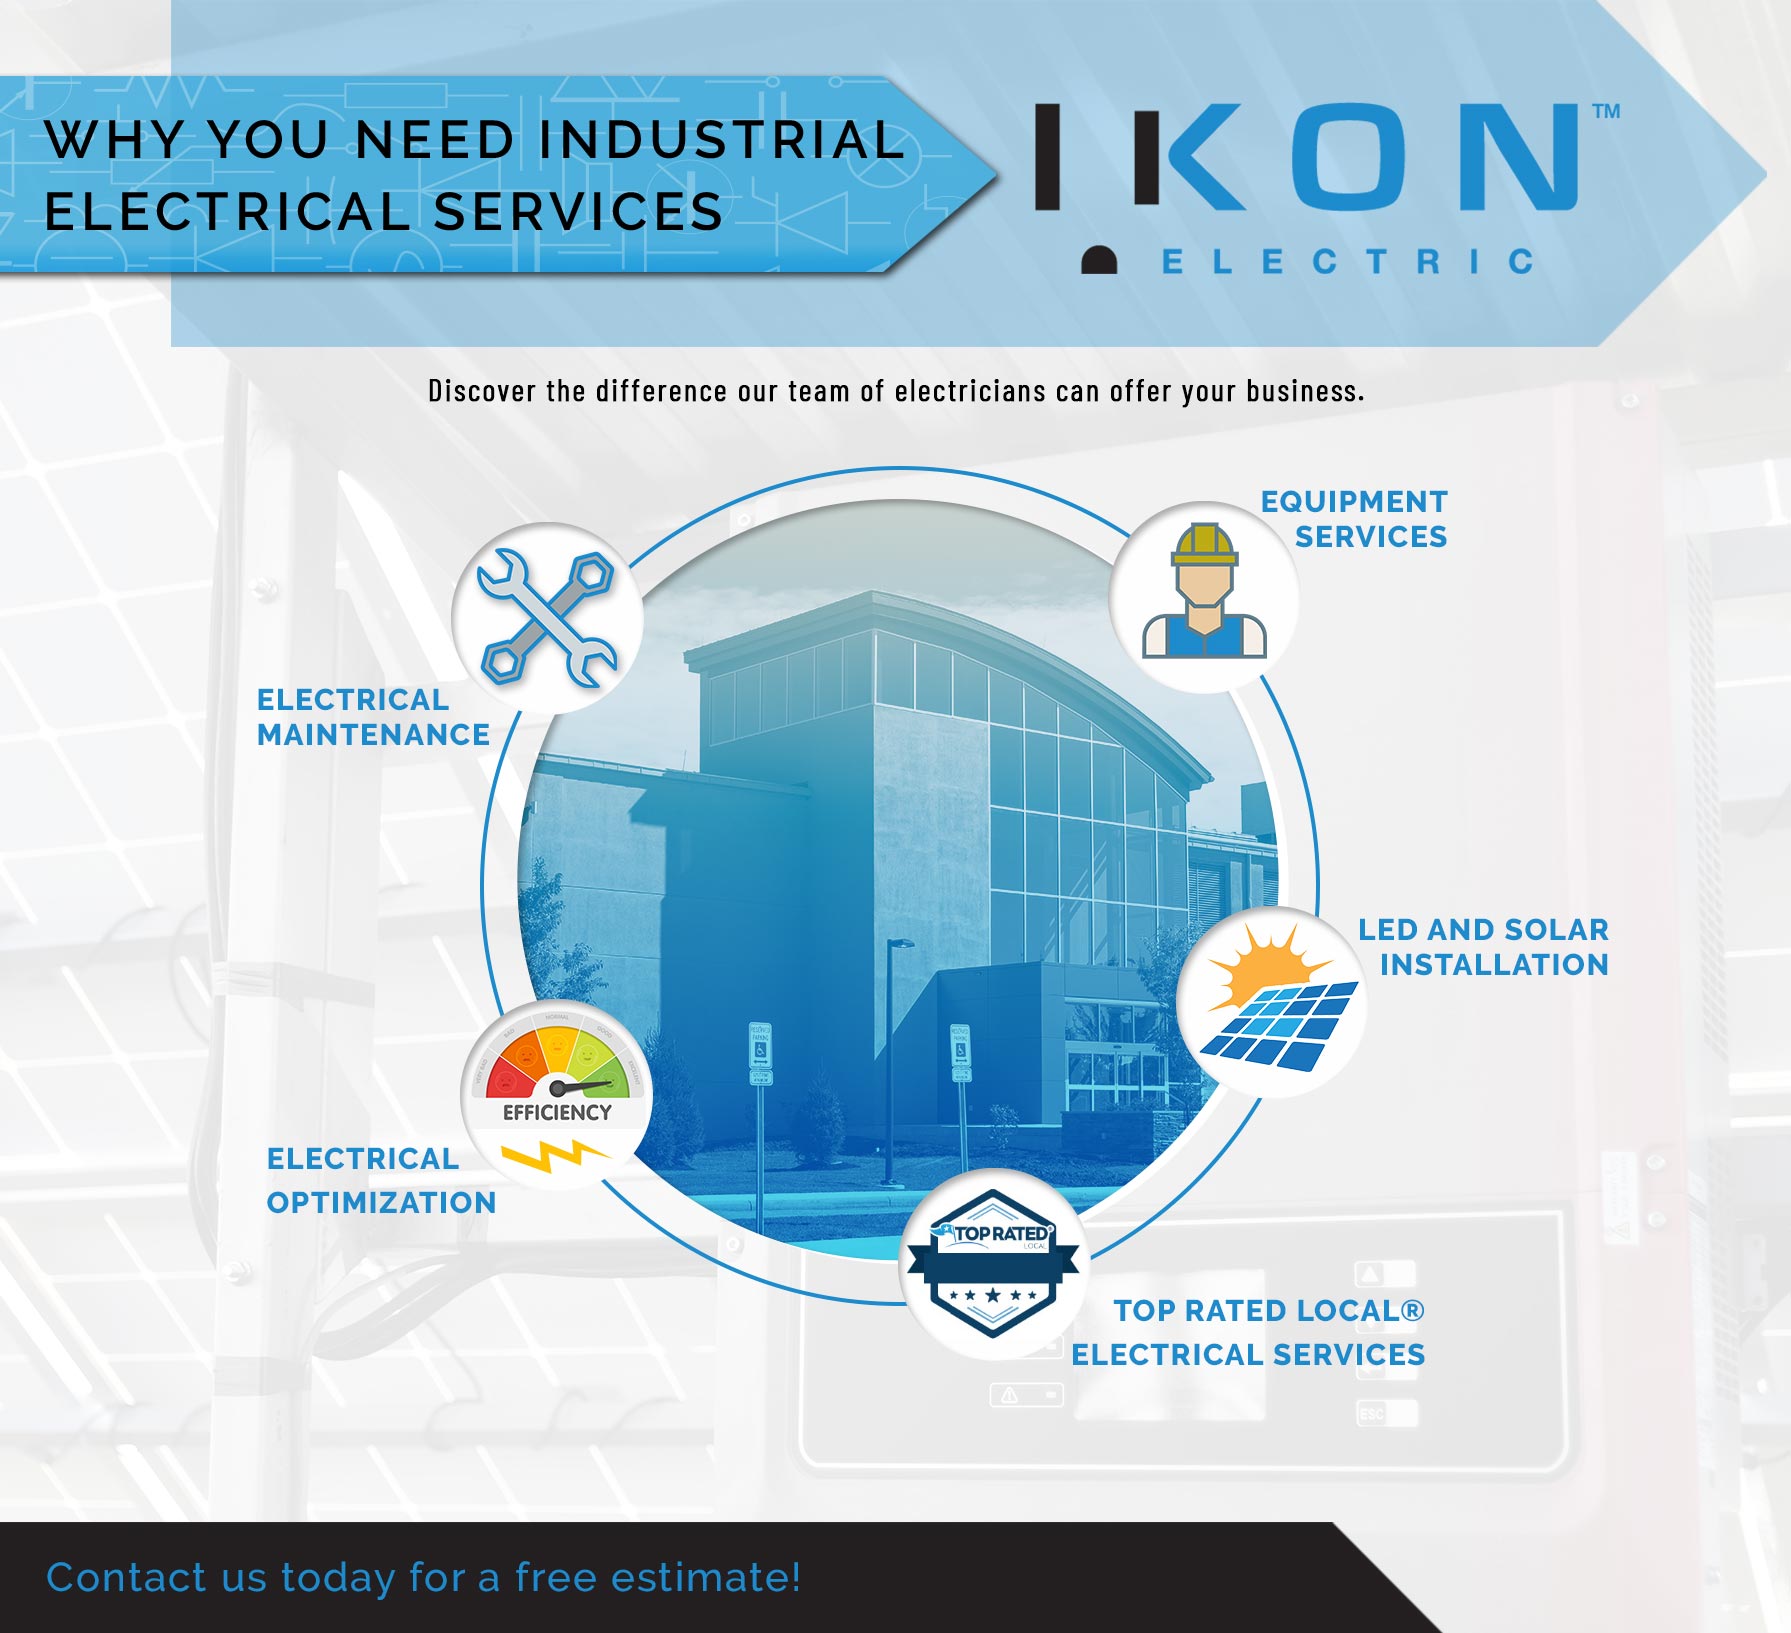 ikon-Infographic---Why-You-Need-Industrial-Electrical-Services